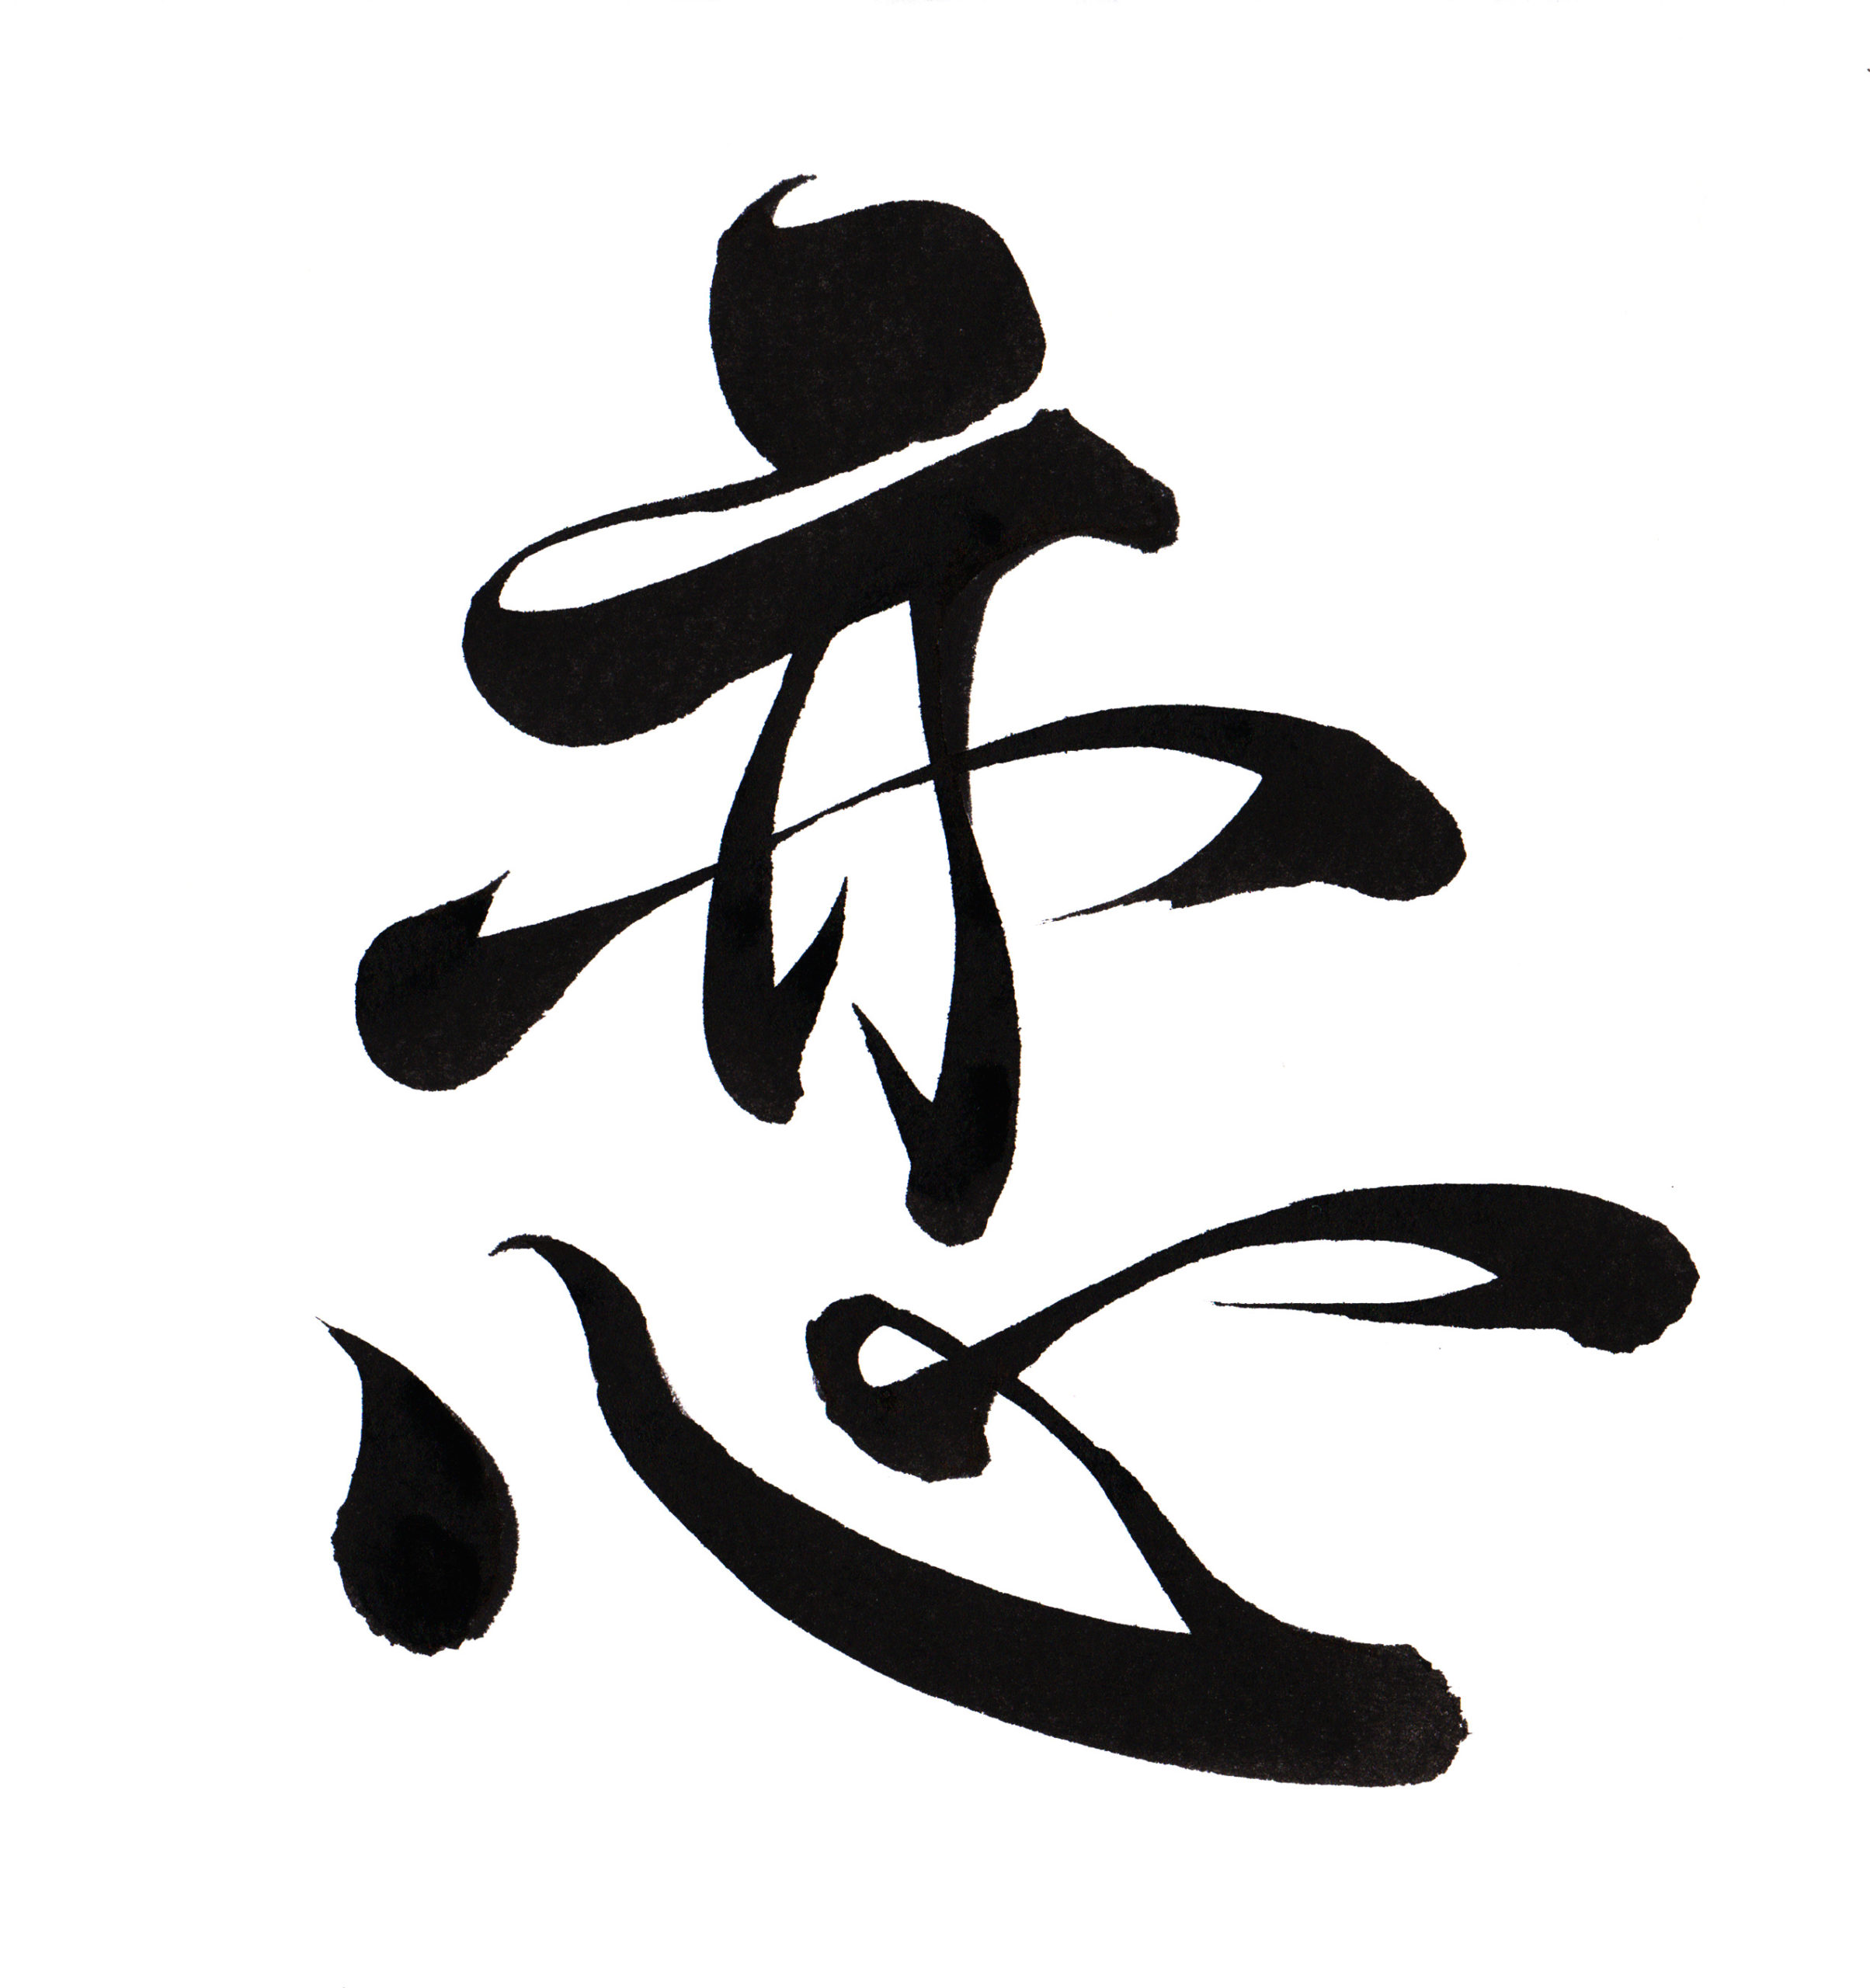 An image of the symbol for Love in Japanese calligraphy from around the world.